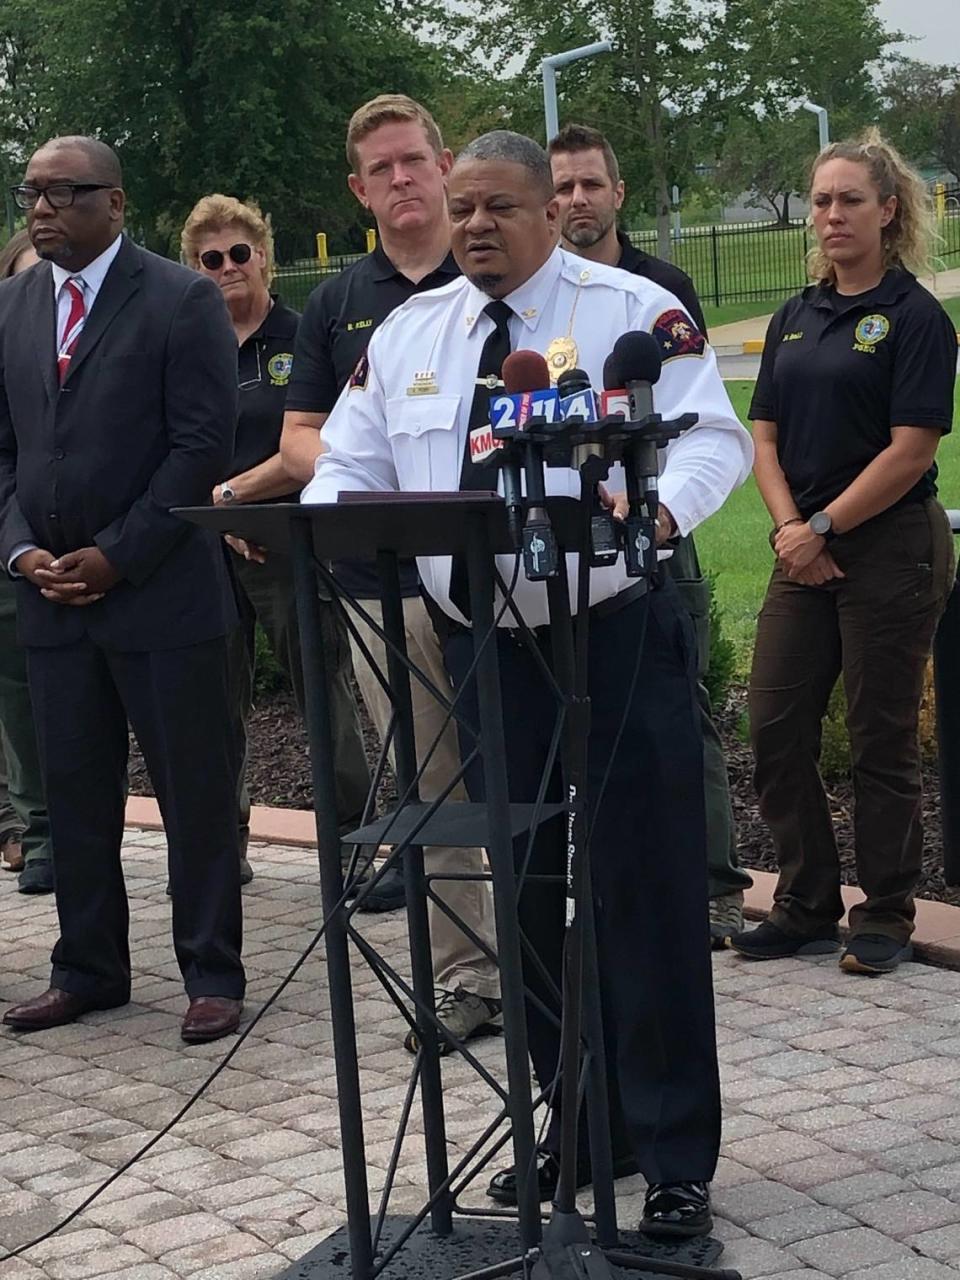 East St. Louis Police Department Chief Kendall Perry and local officials announced a plan to install 75 automated license plate readers along Interstate 55, Interstate 70 and Interstate 64 as part of an effort to curb violent crime.